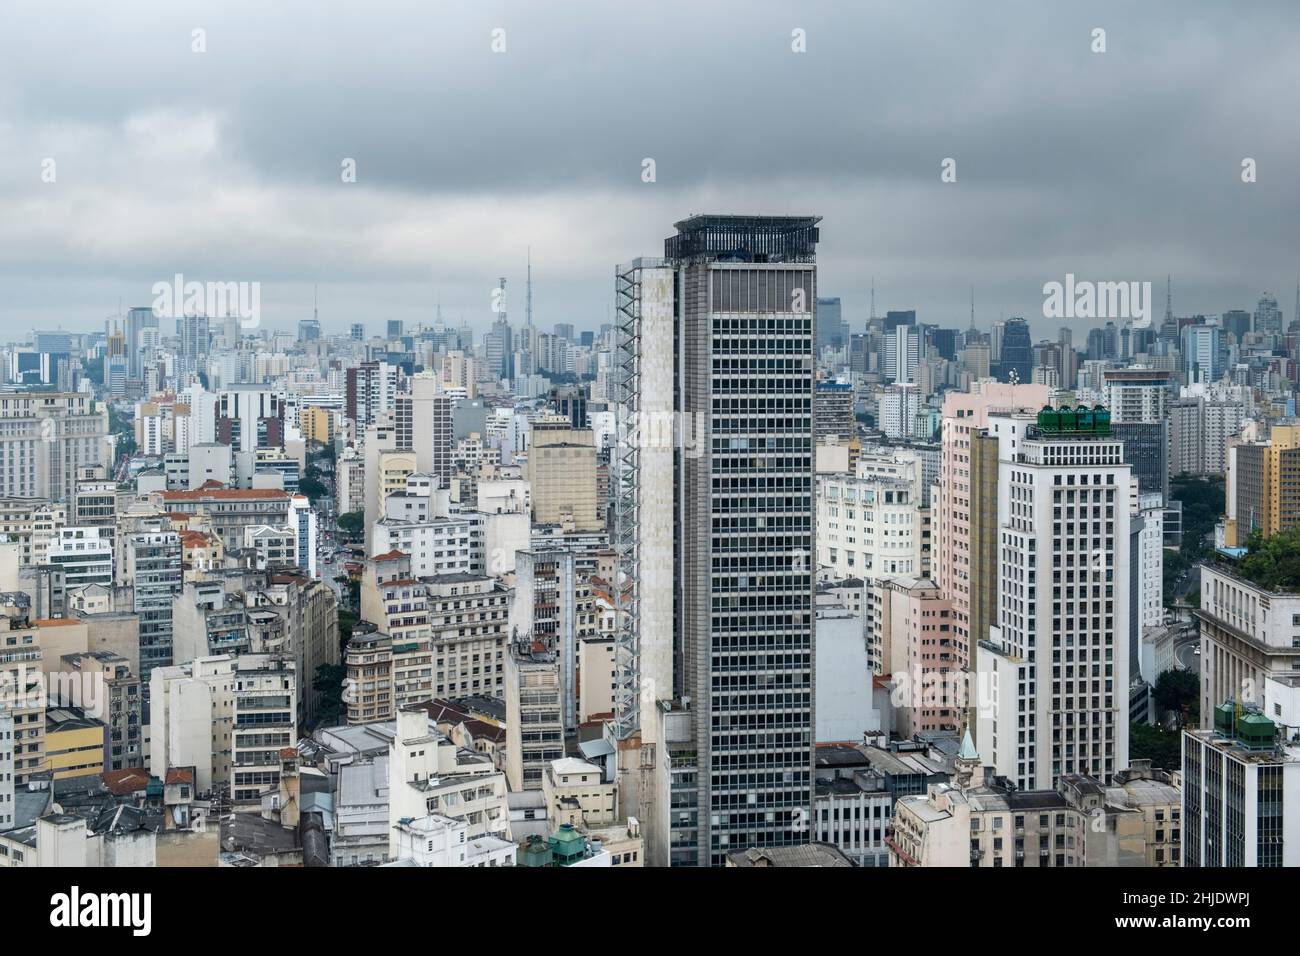 Brazil, São Paulo. Cityscape skyline of high rise commercial and residential buildings in the downtown district. Largest city in the Americas. Stock Photo